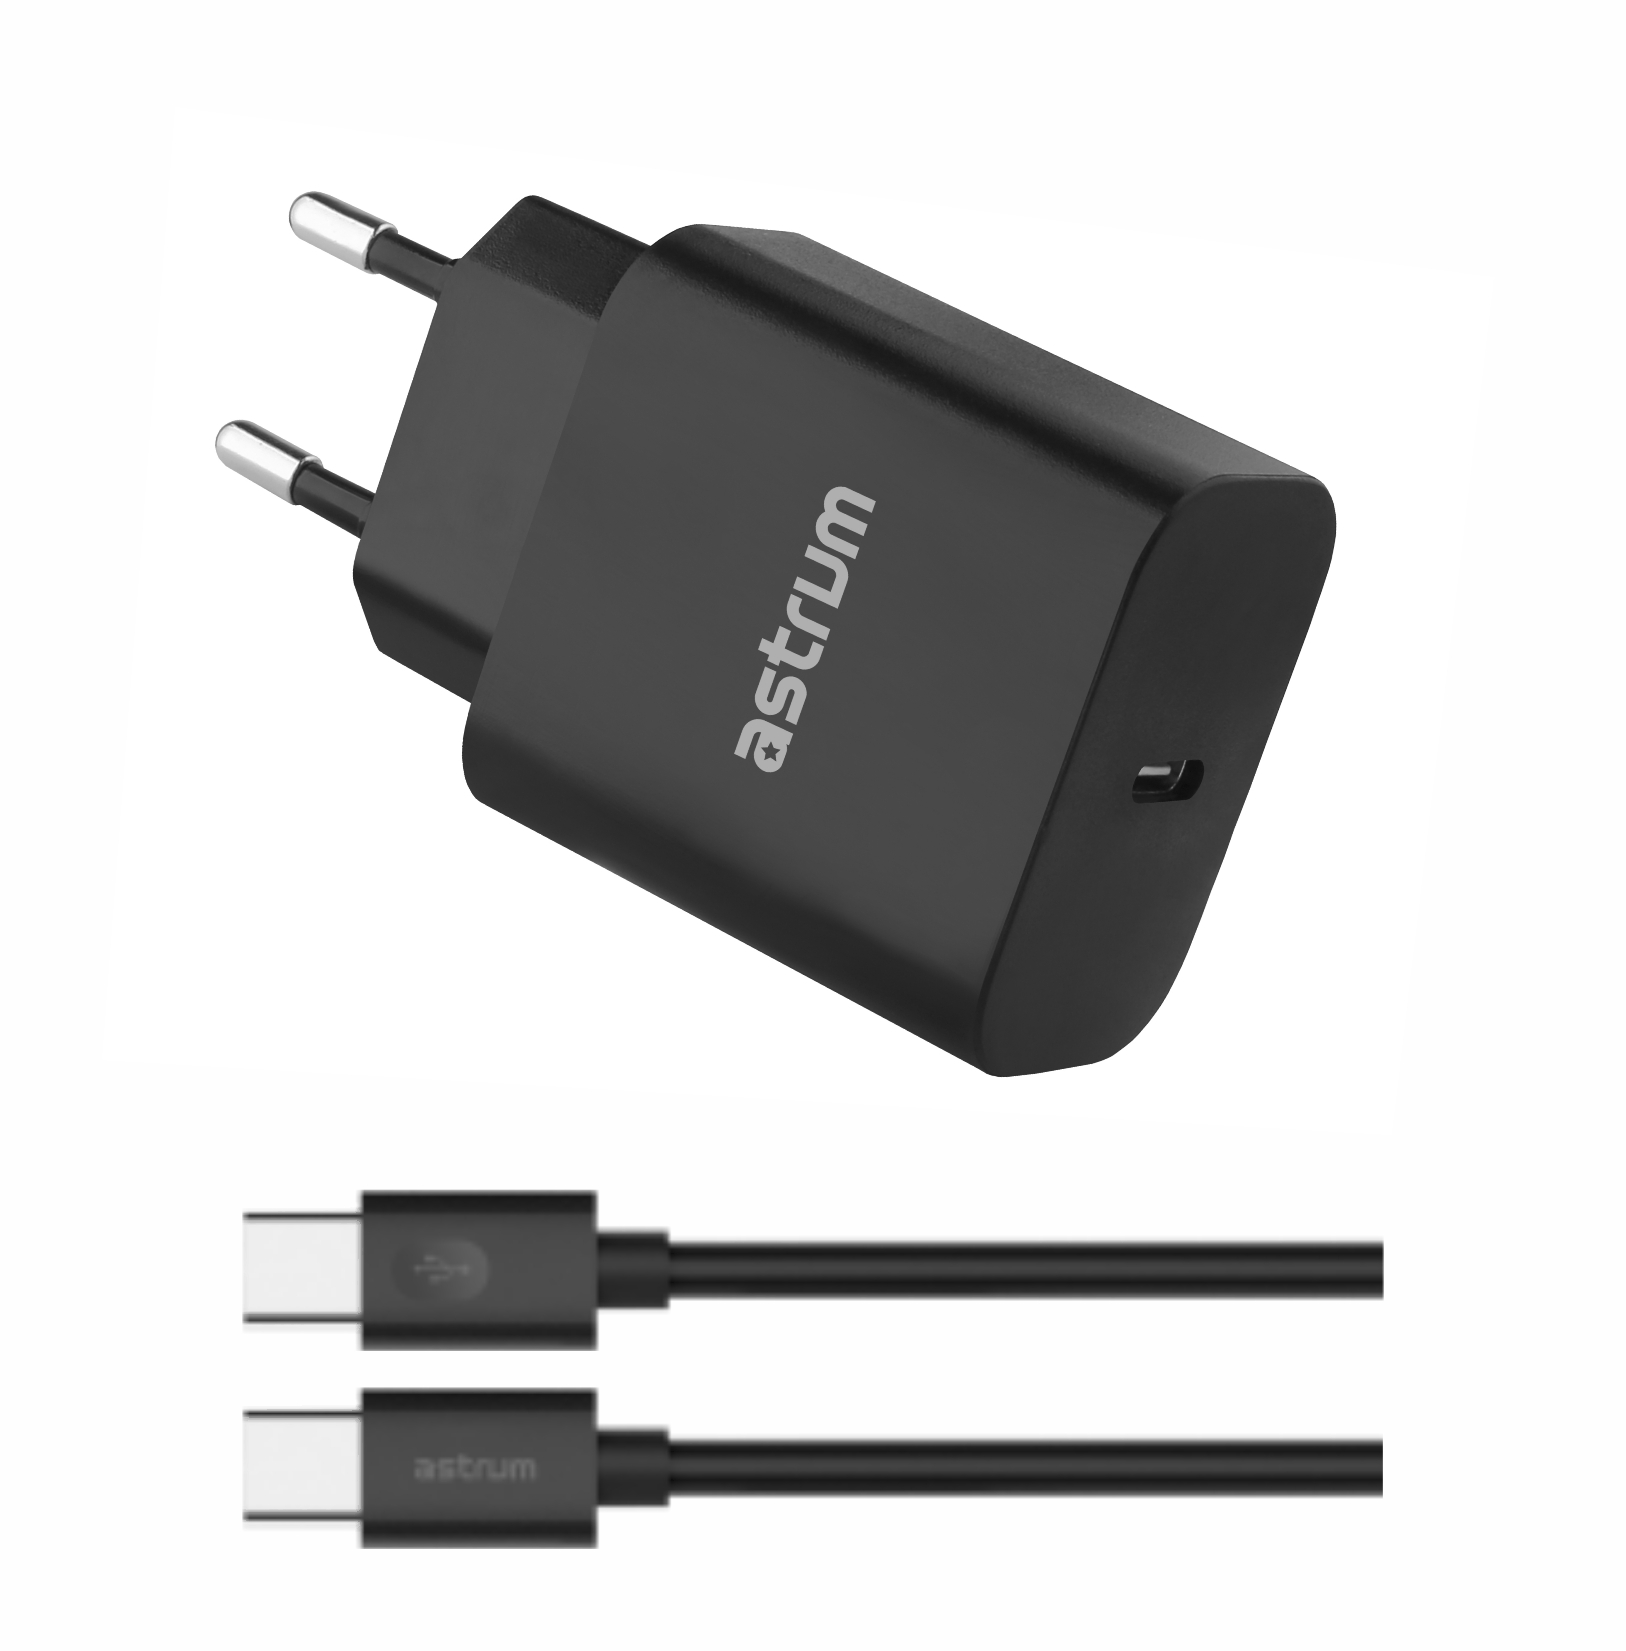 Pro PD20 USB-C PD20W Travel Wall Charger + USB-C Cable - Black